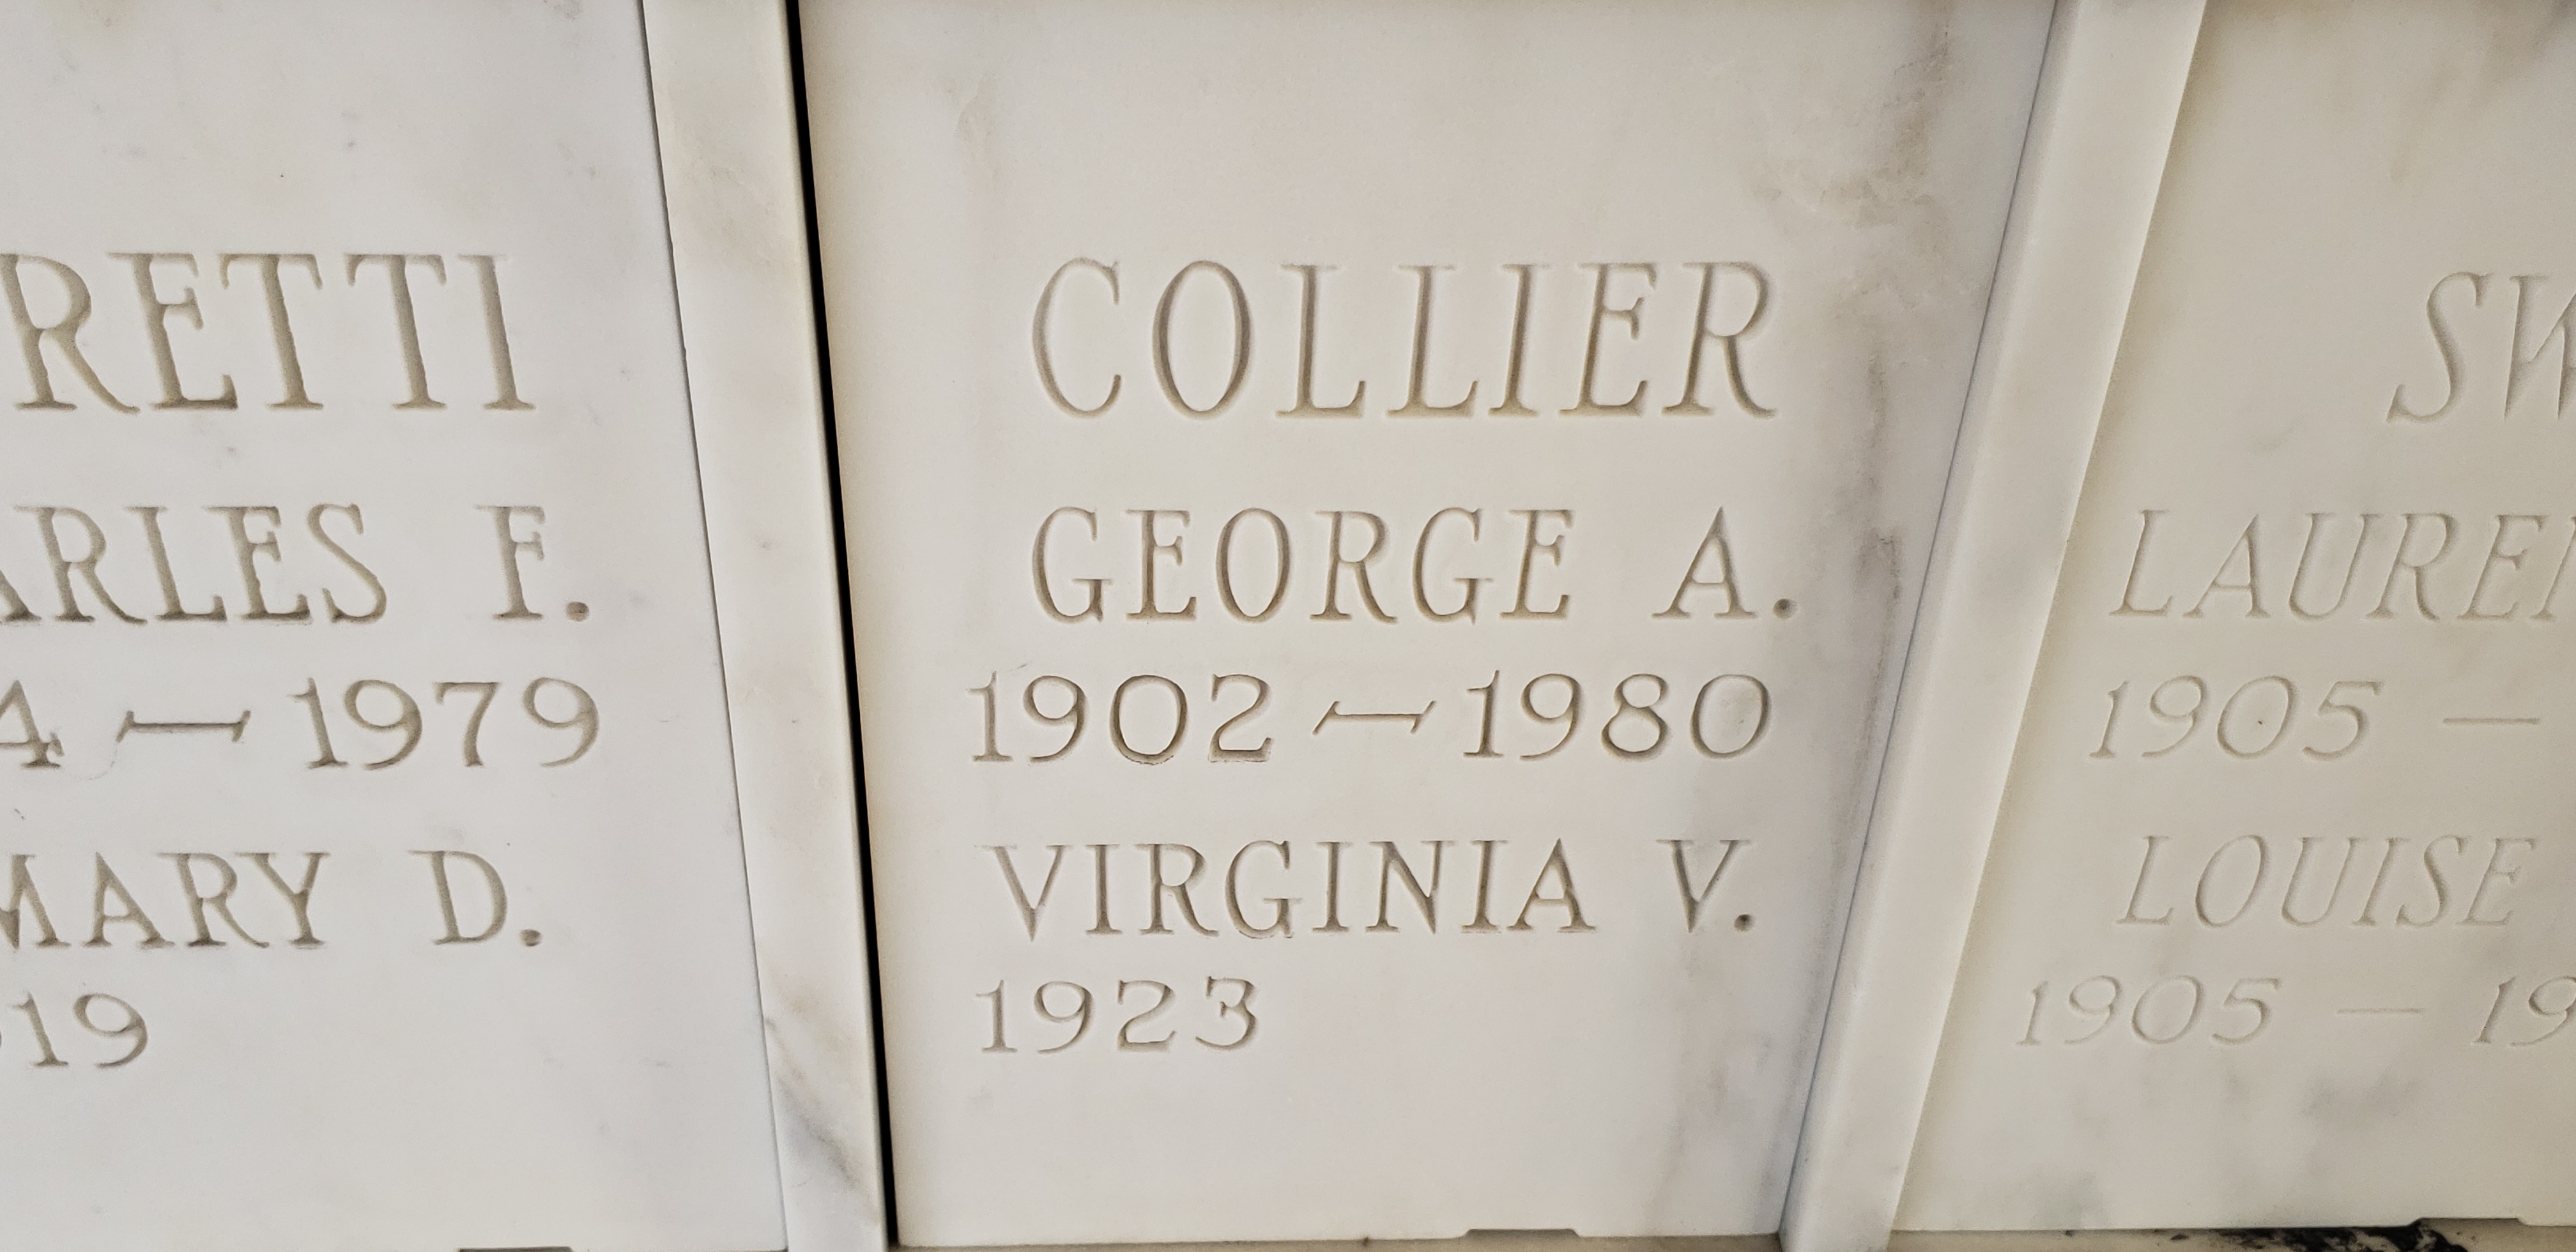 George A Collier